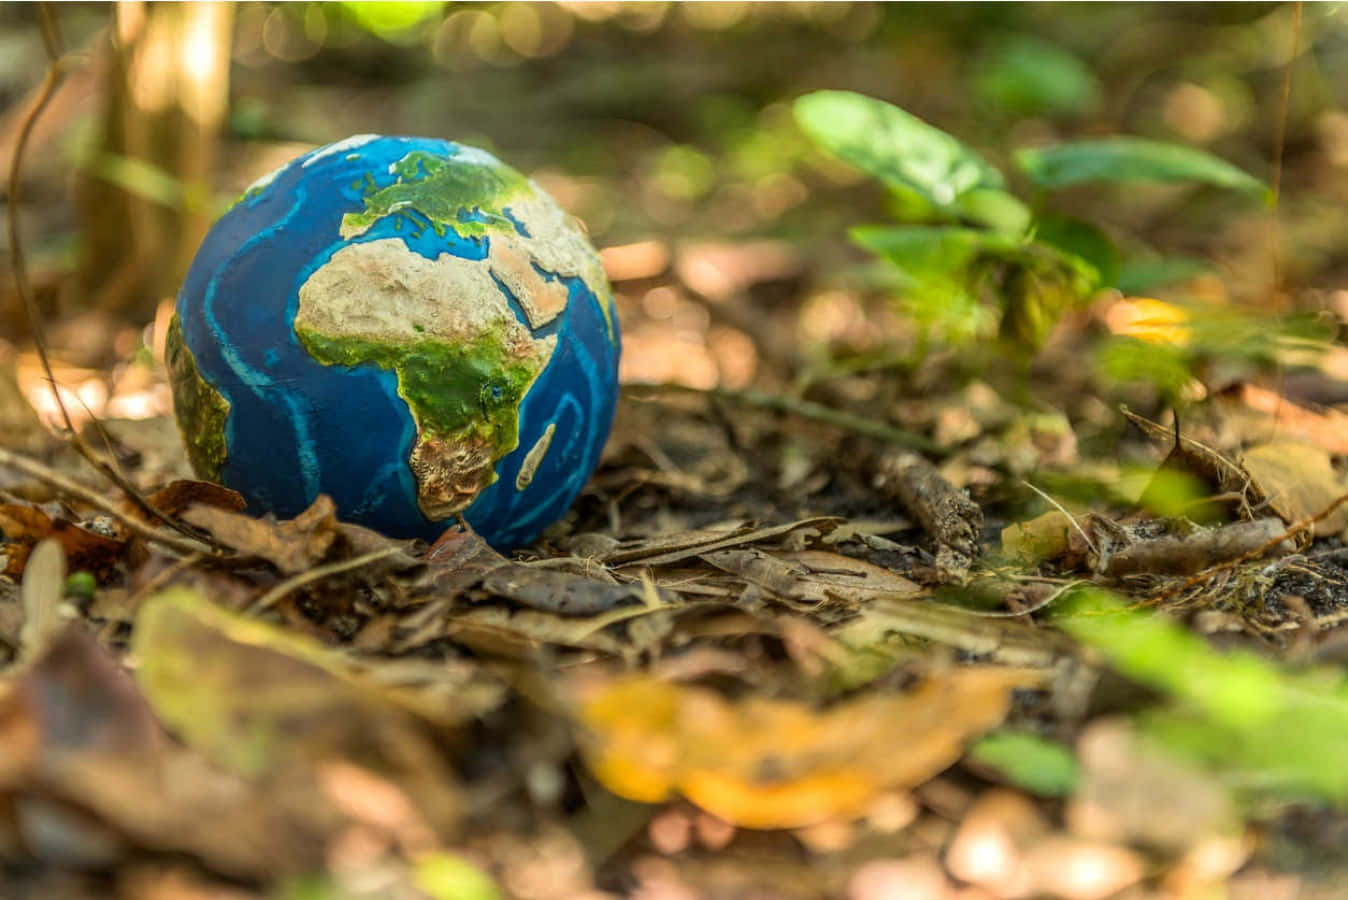 A Small Globe Sitting On The Ground In The Forest